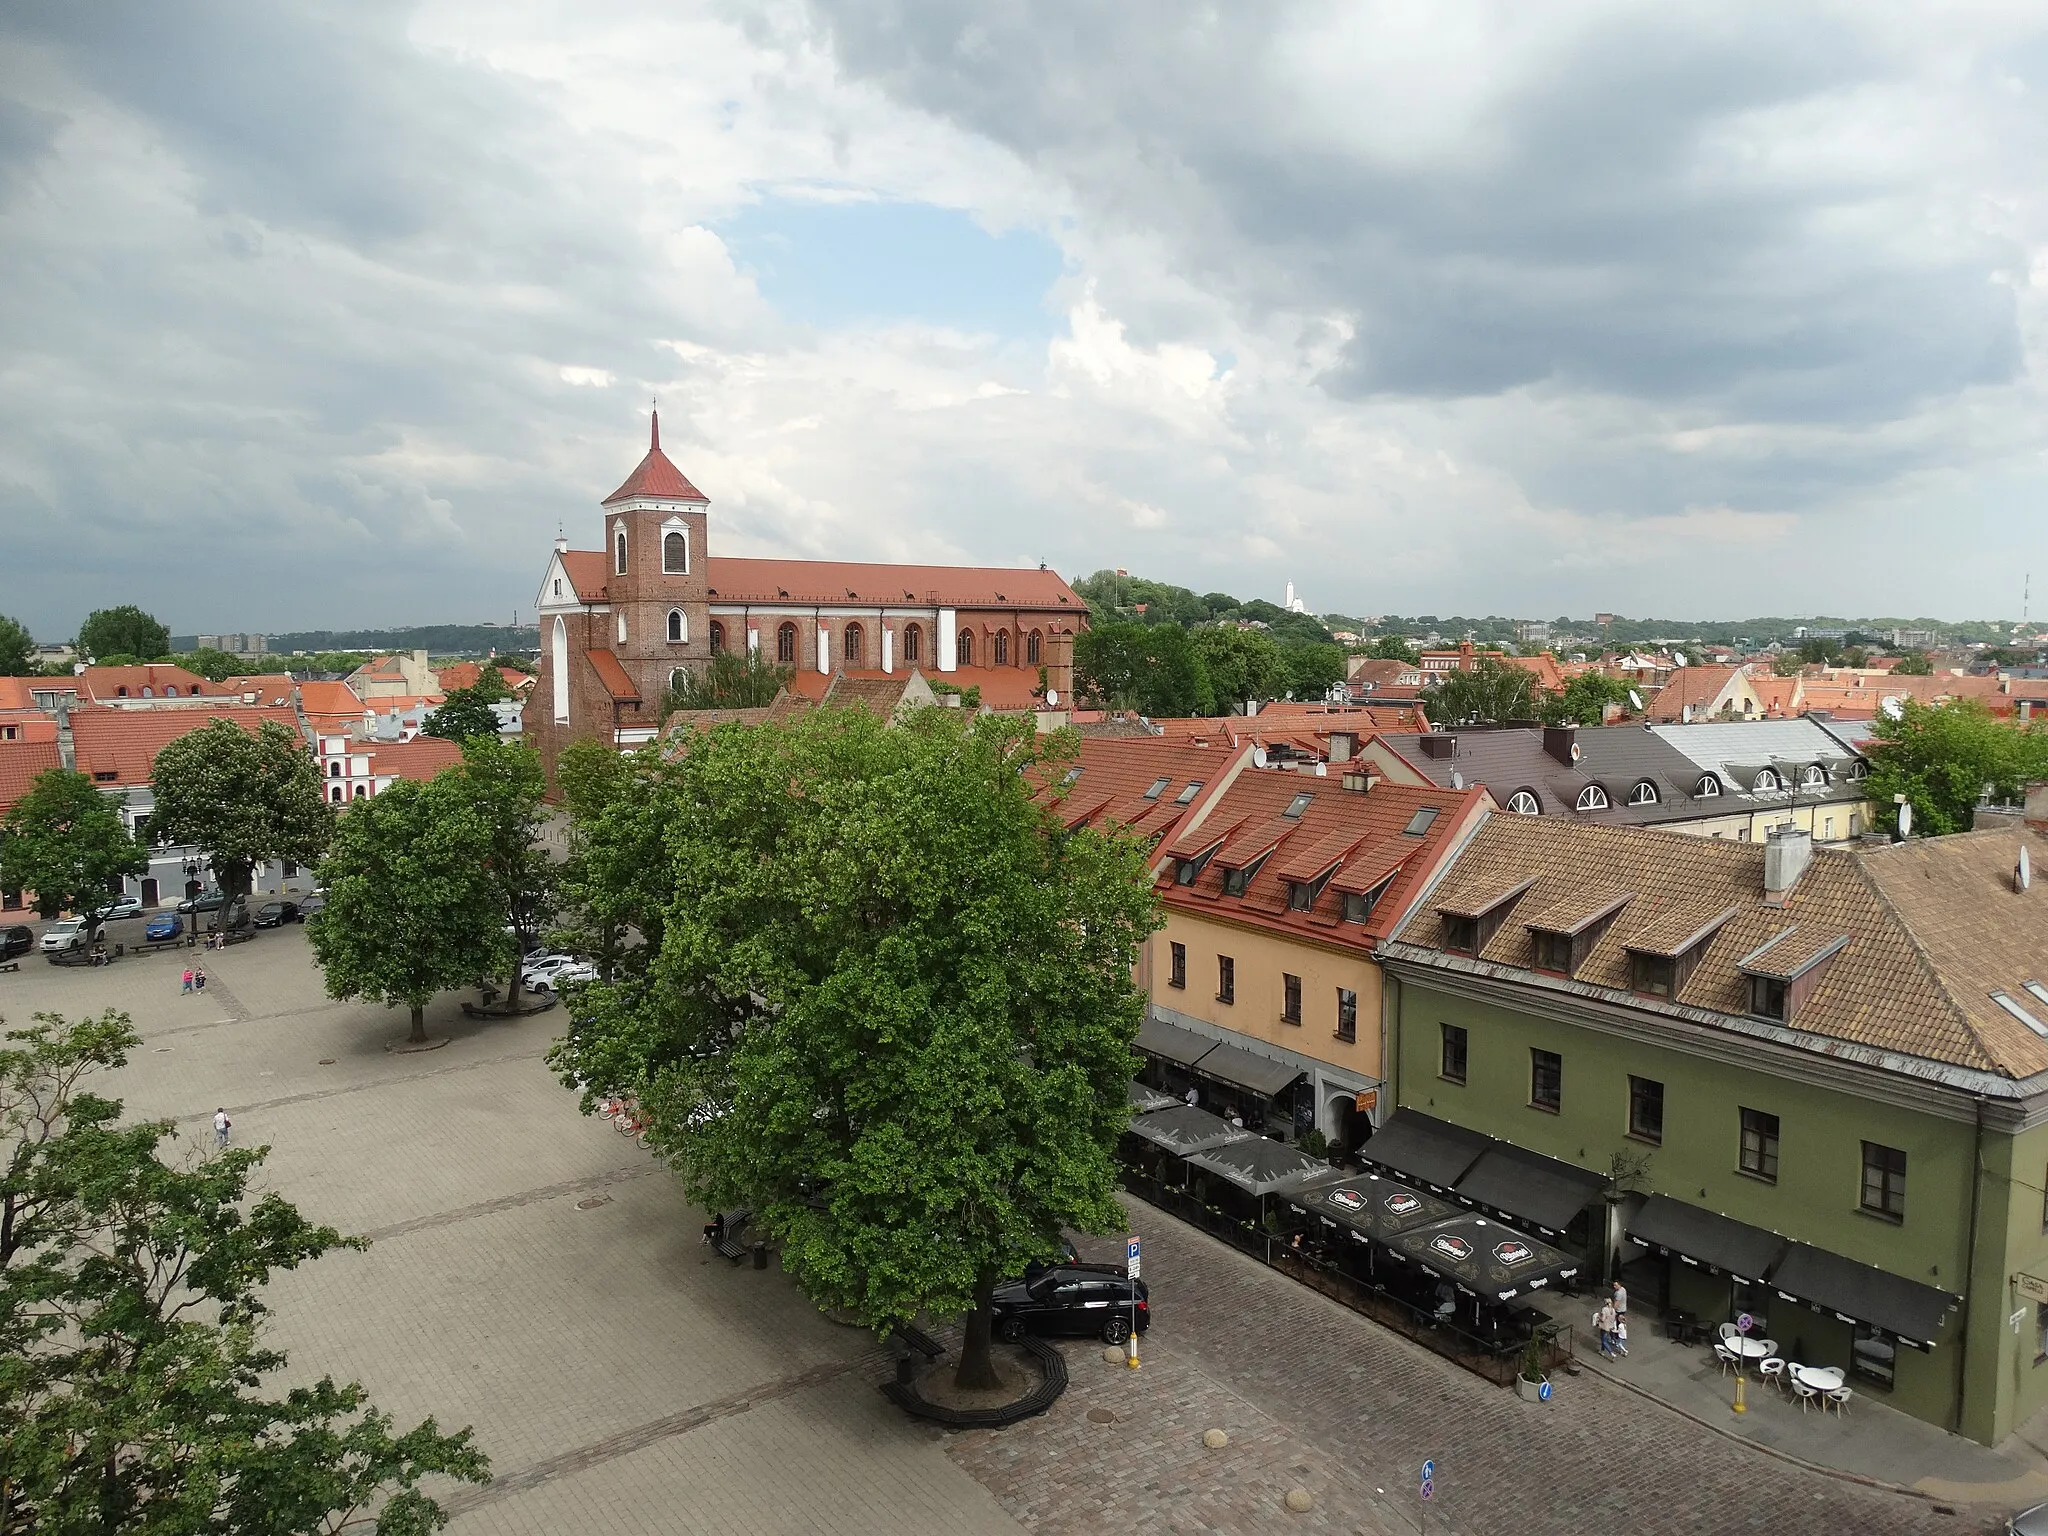 Photo showing: Old town, Kaunas, Lithuania